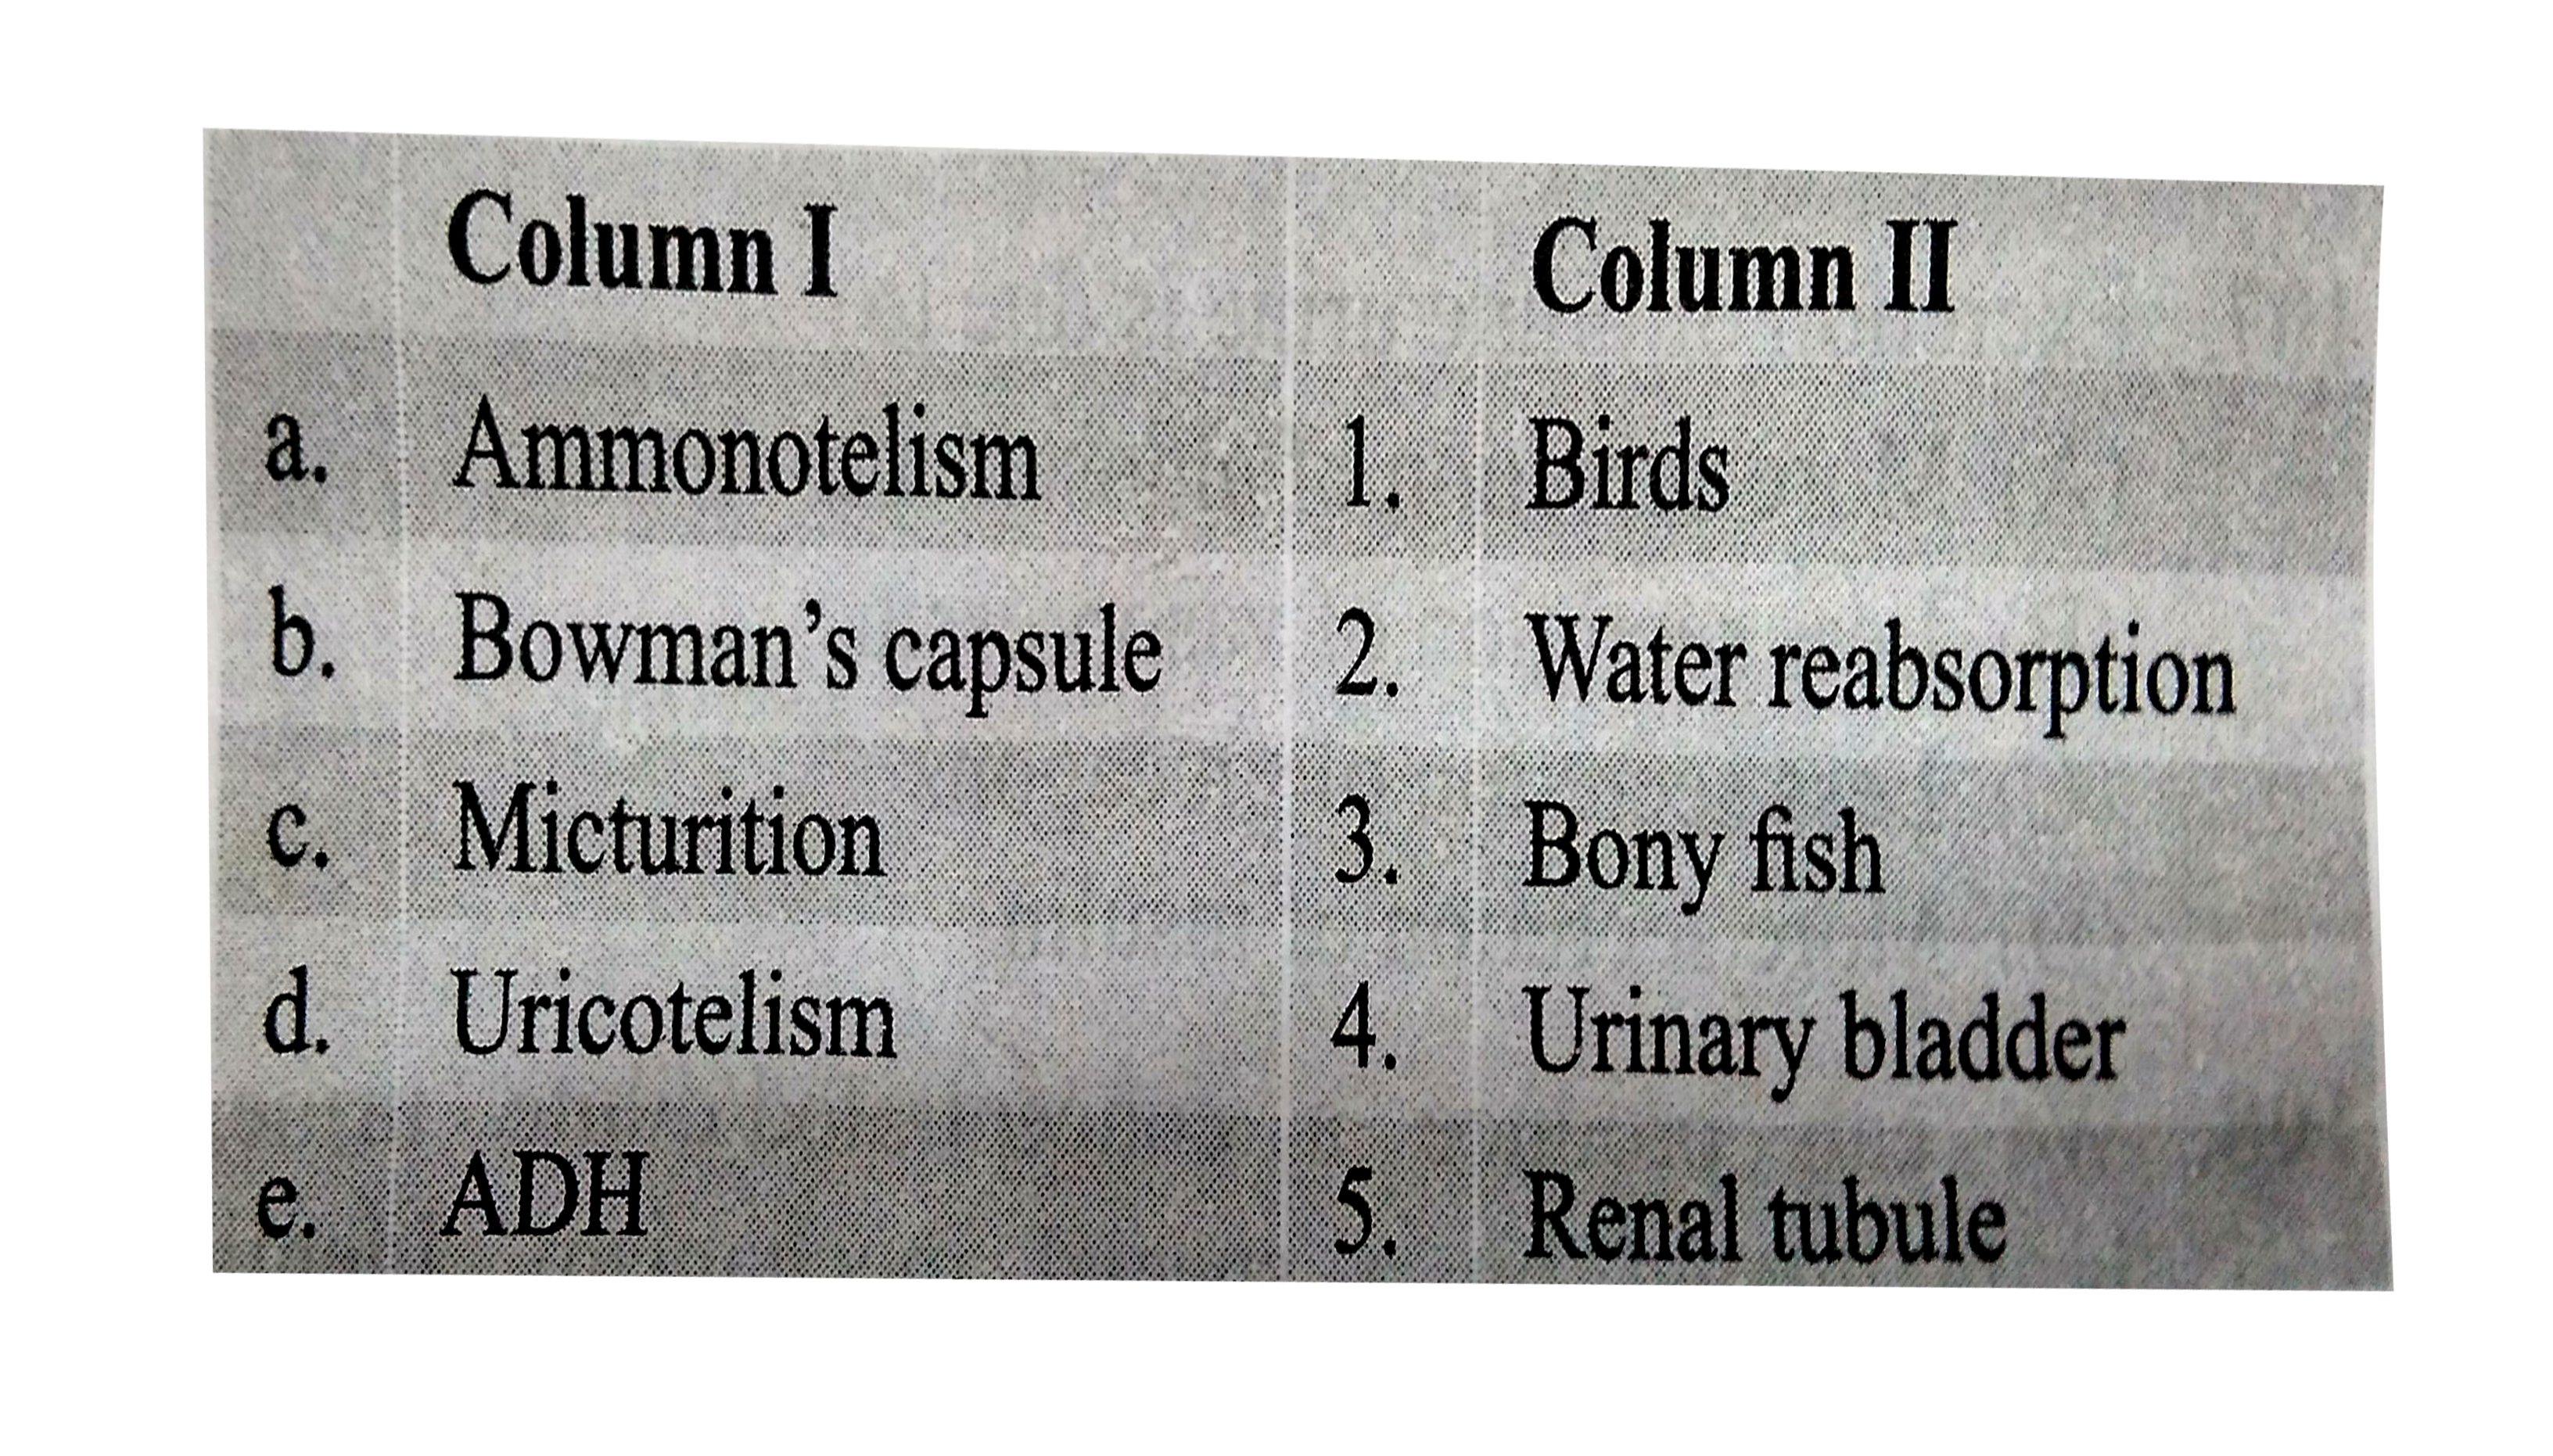 Match the columns I and II and choose the correct cobination from the option given